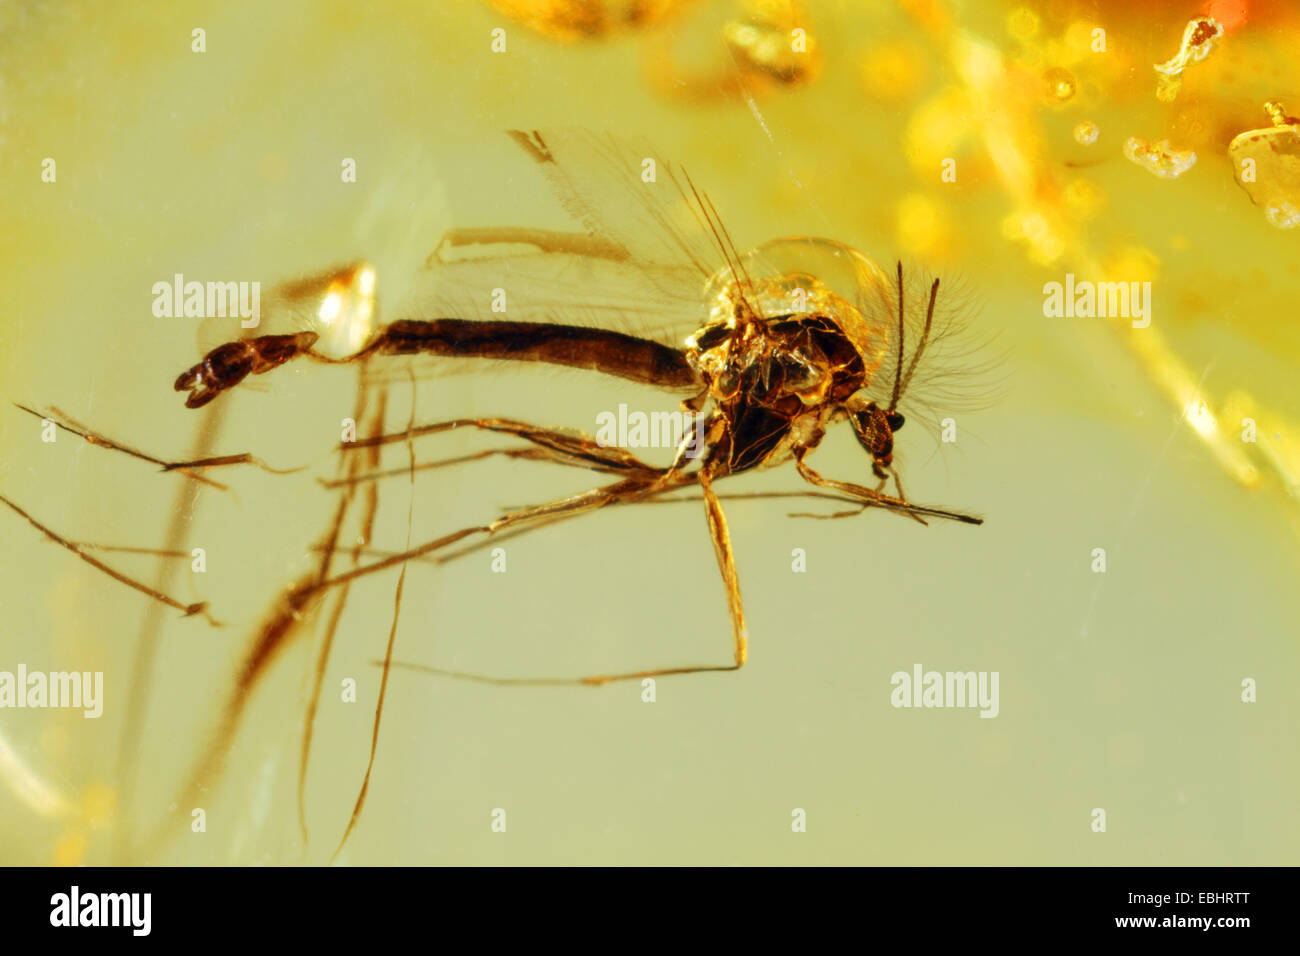 Close-up of a small insect caught in amber. From around the Baltic sea. Stock Photo